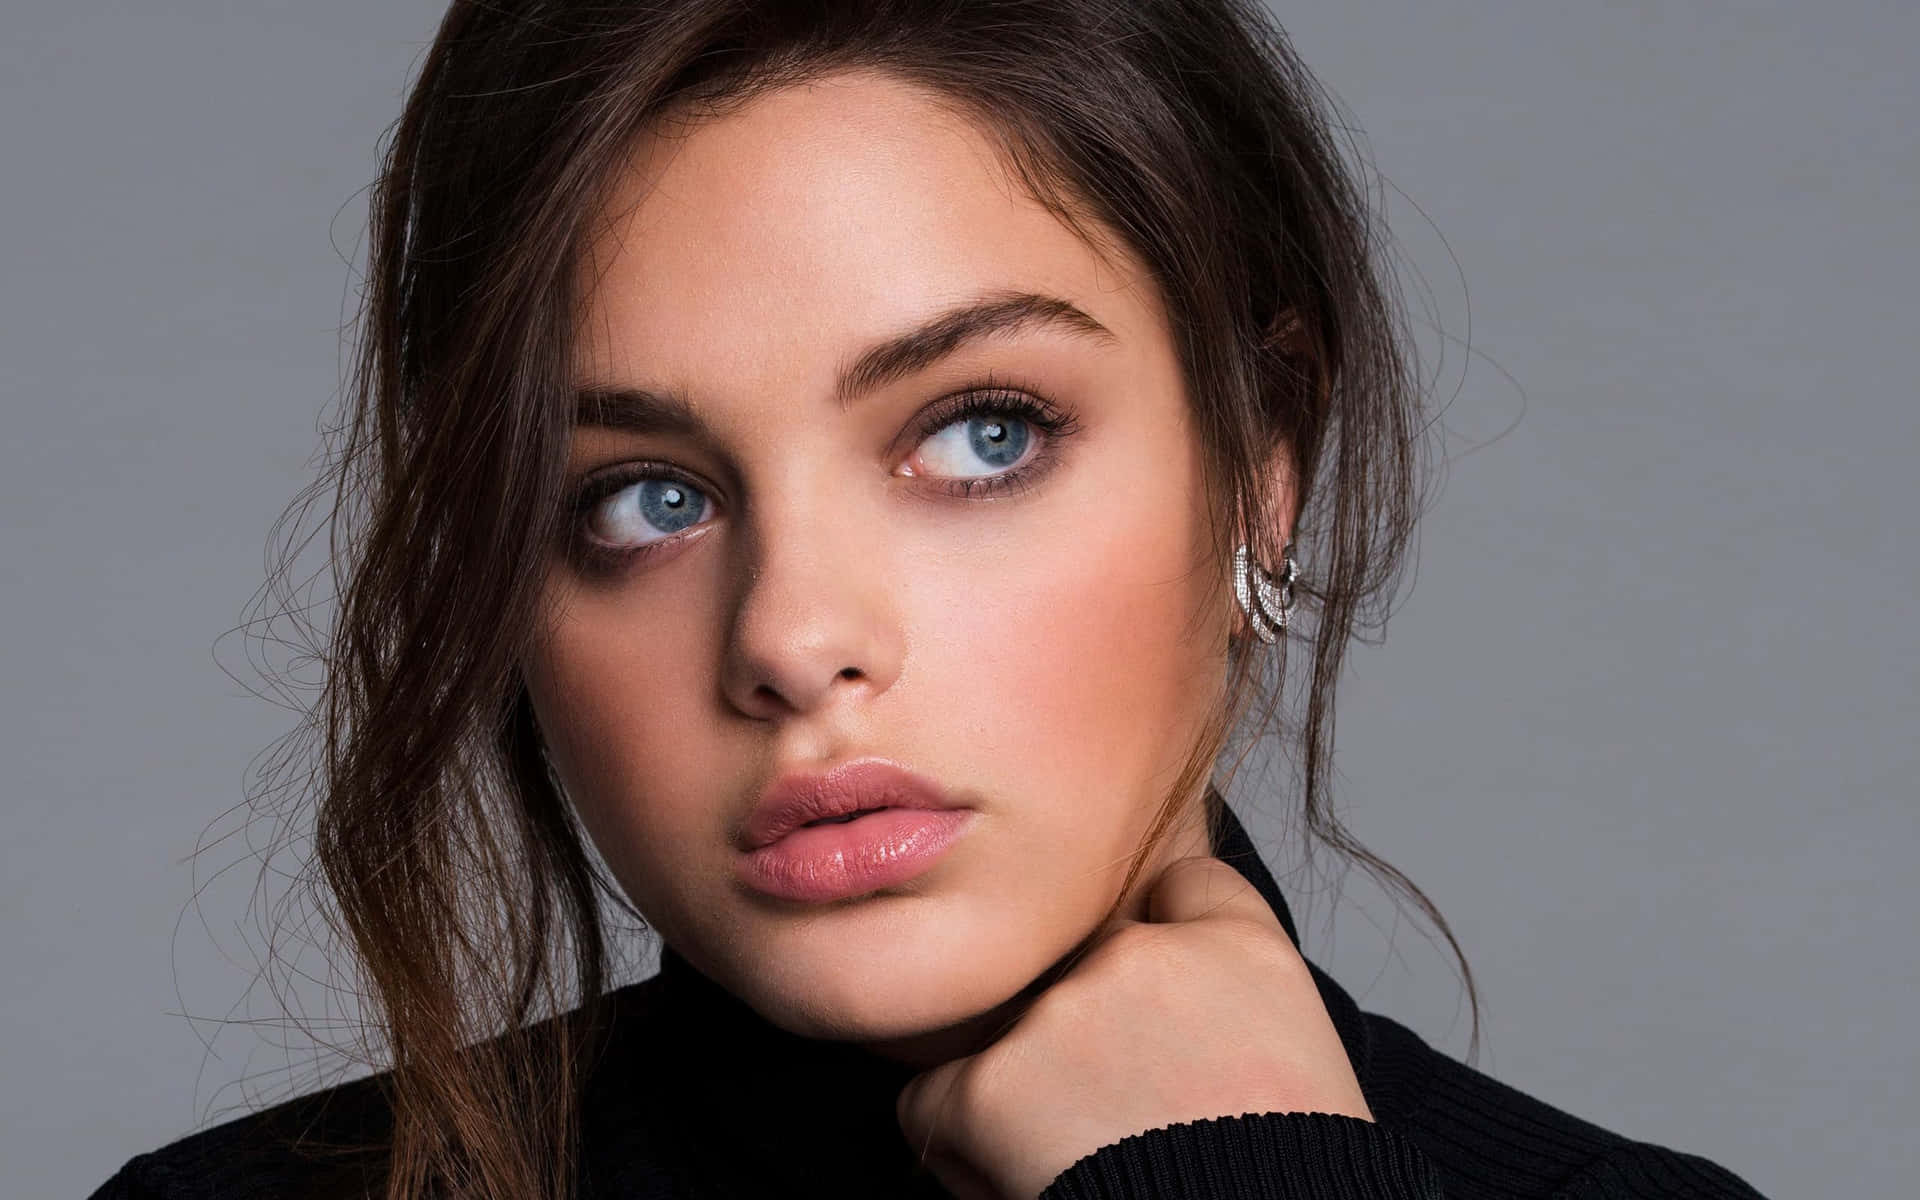 Odeyarush Face Portfolio In Italian Can Be Translated As 